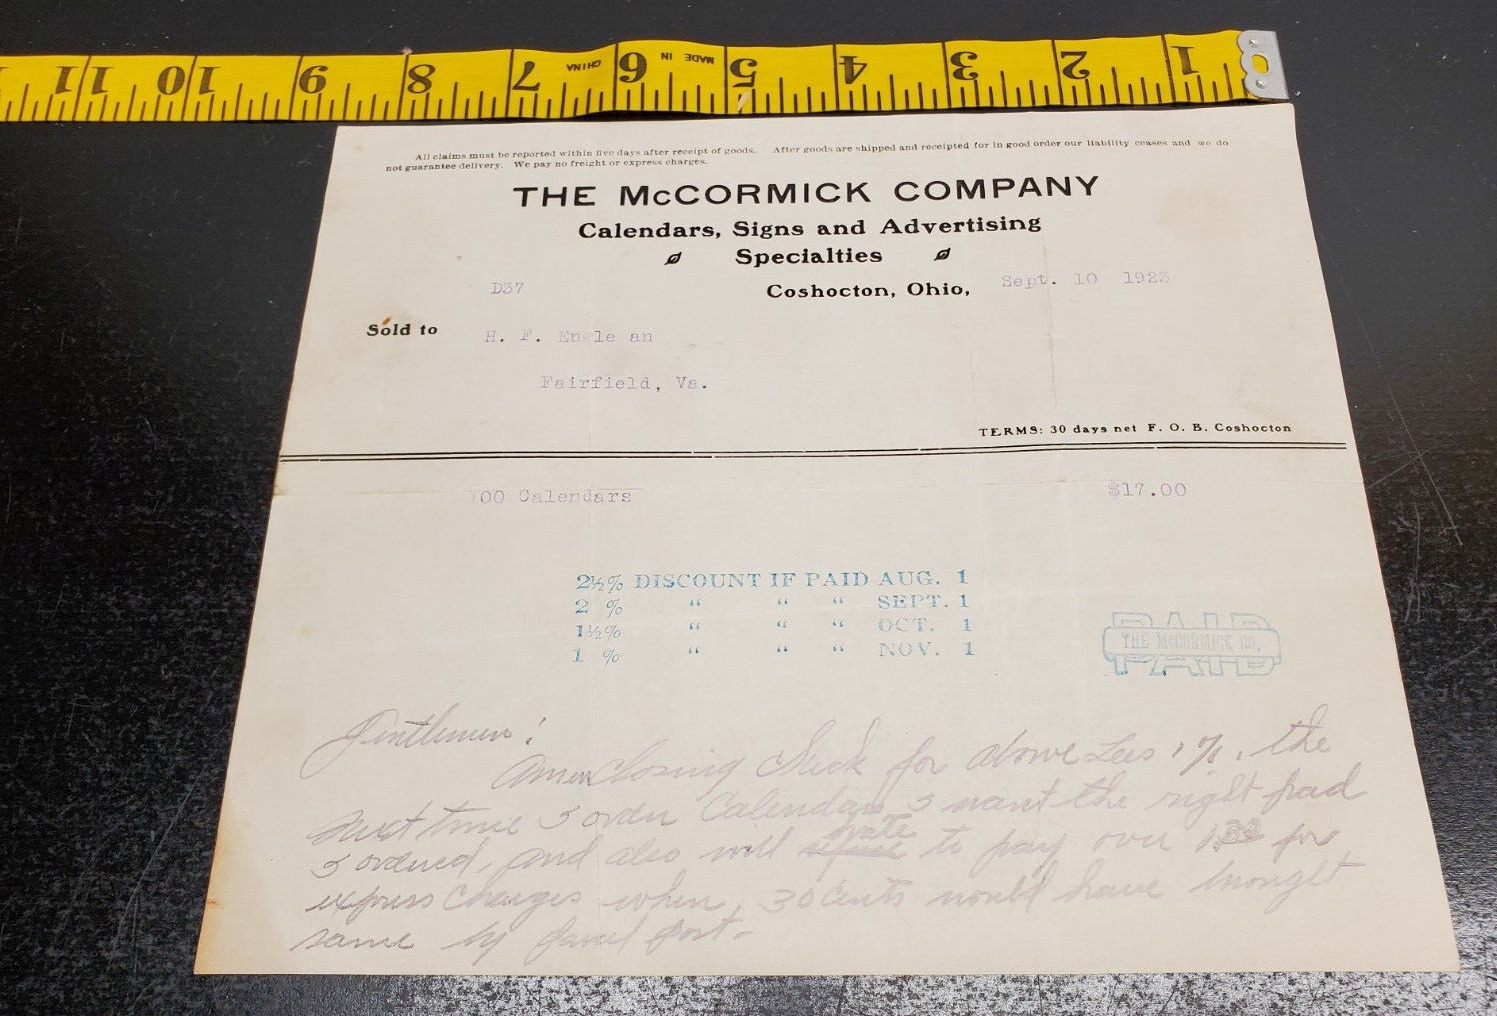 September 1923 The McCormick Company Invoice - Calendars, Signs, and Advertising